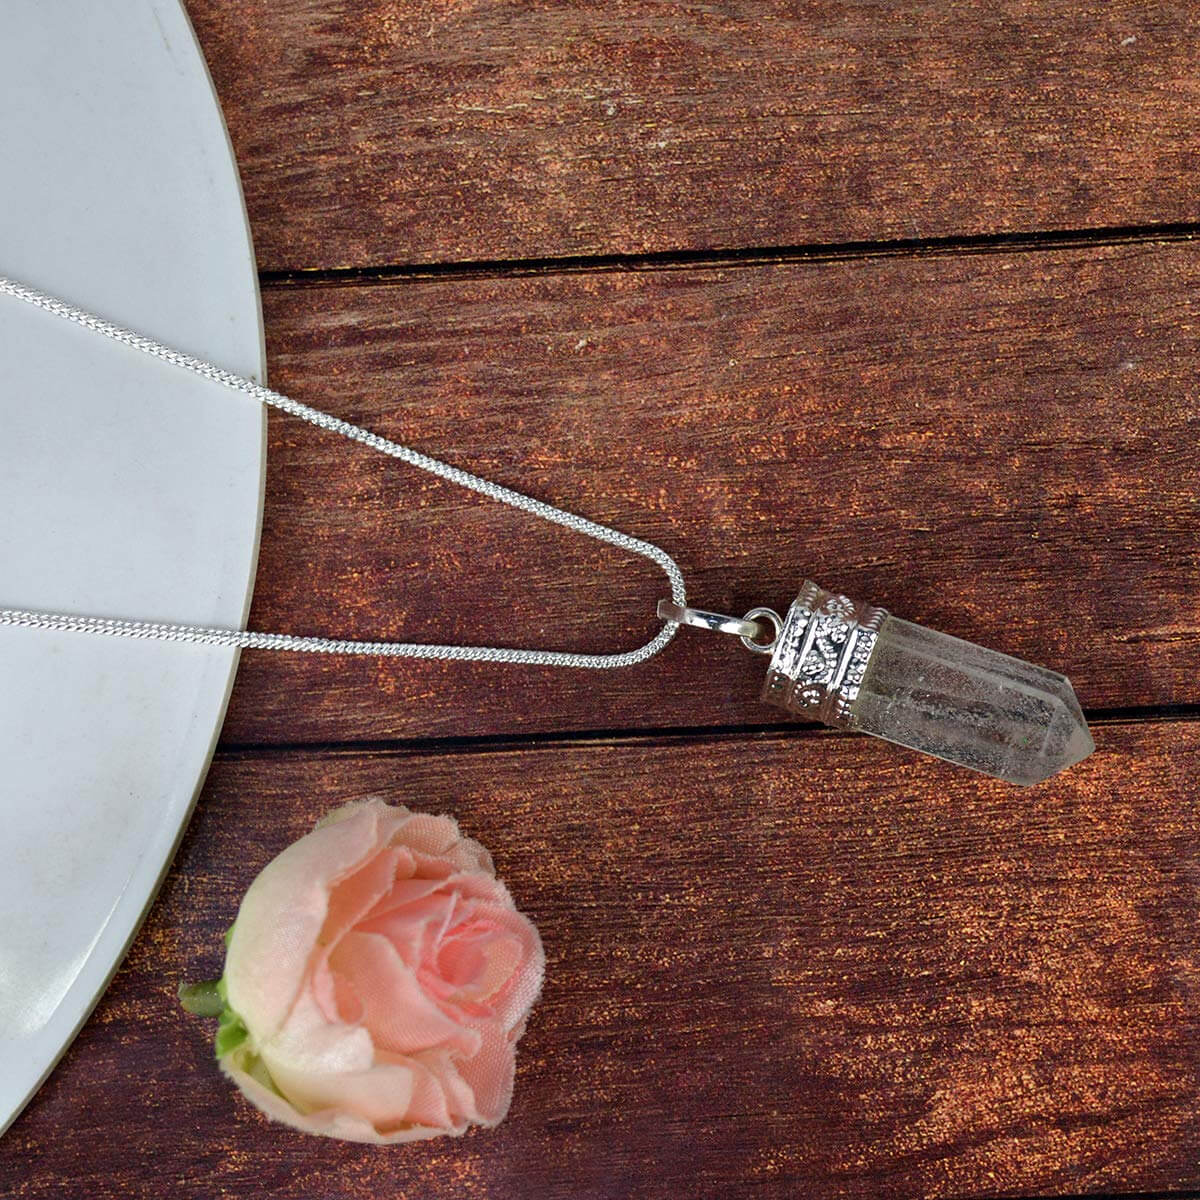 Buy Clear Quartz Crystal Pencil Pendant Online From Premium Crystal Store  at Best Price - The Miracle Hub